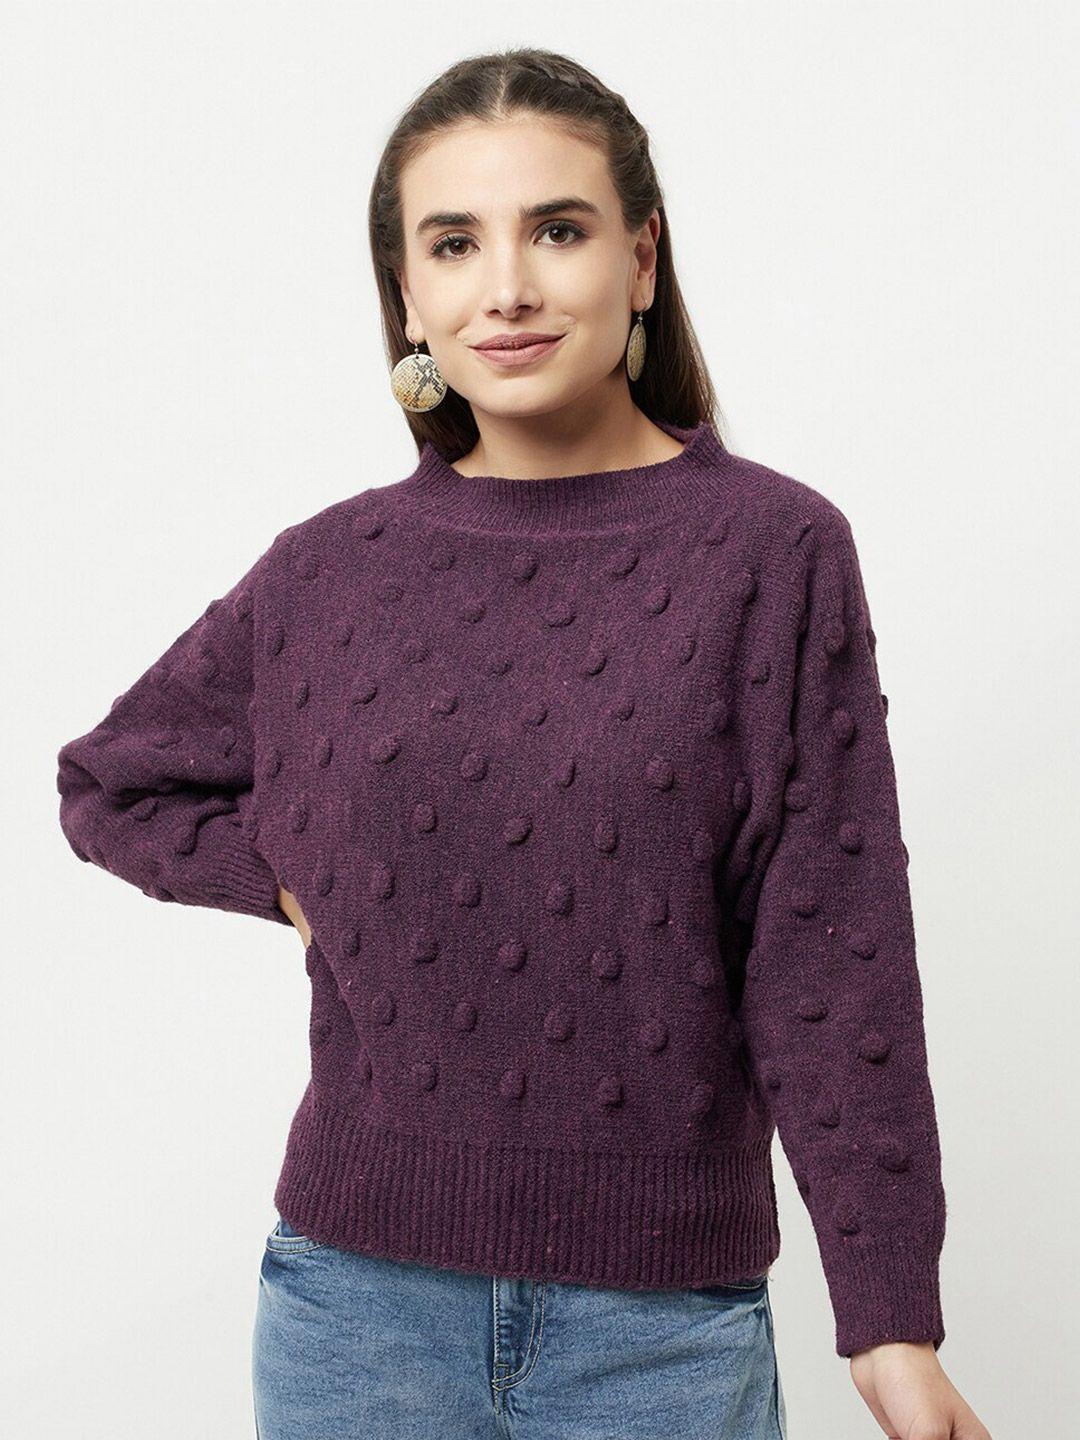 knitstudio cable knit self design woollen pullover